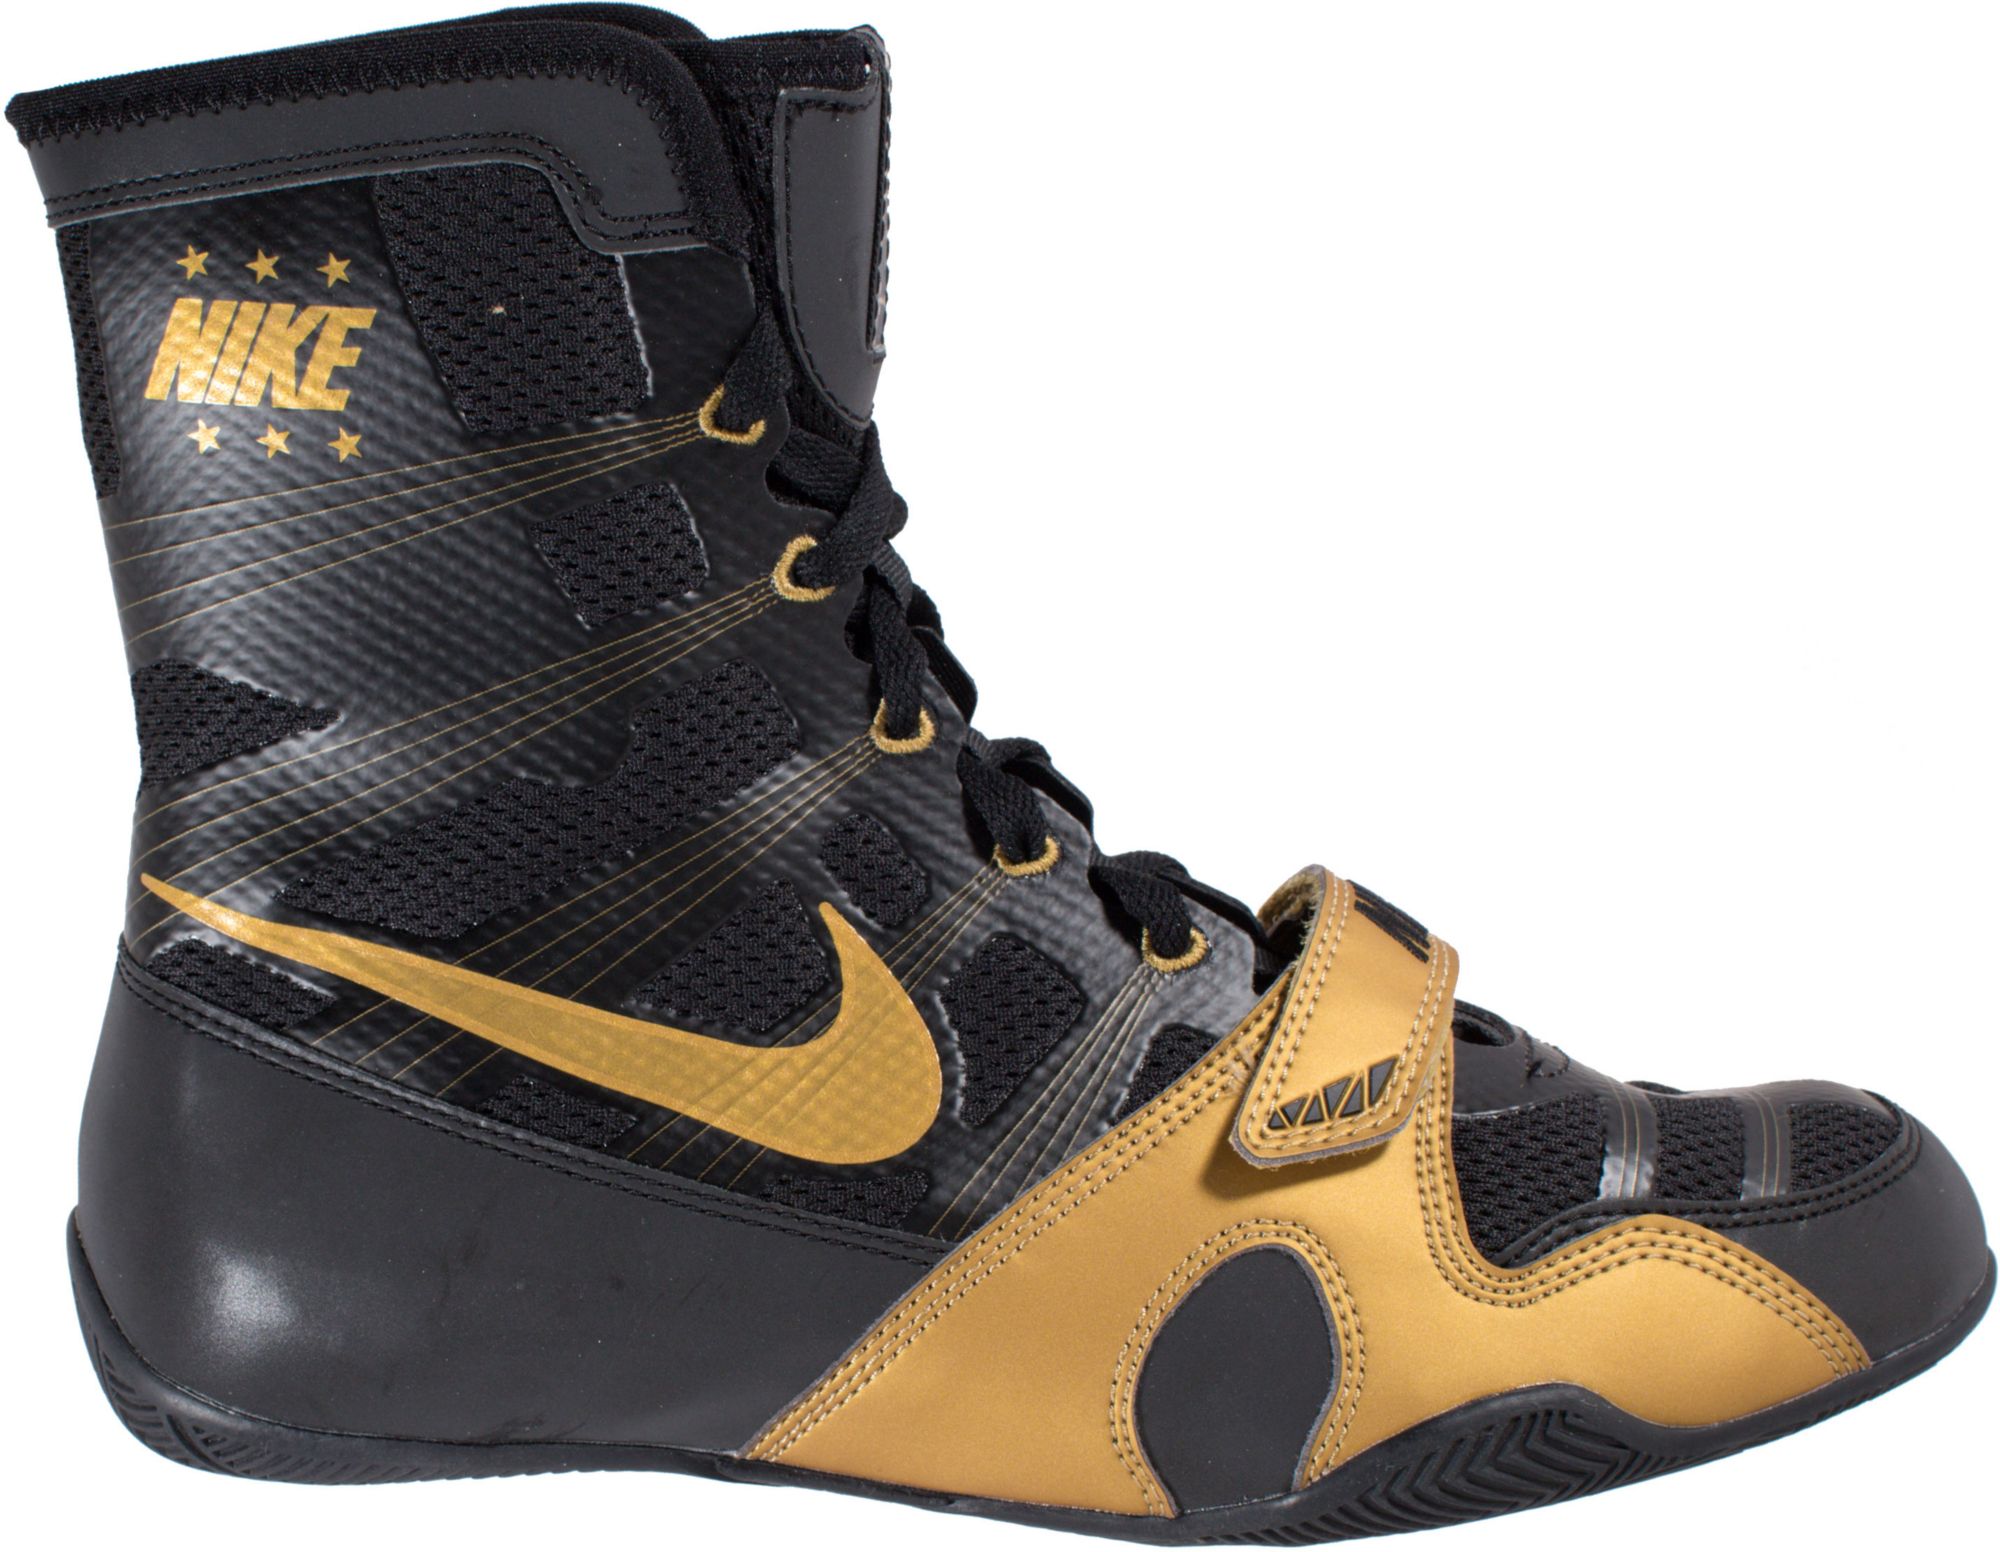 nike hyper ko limited edition boxing boot